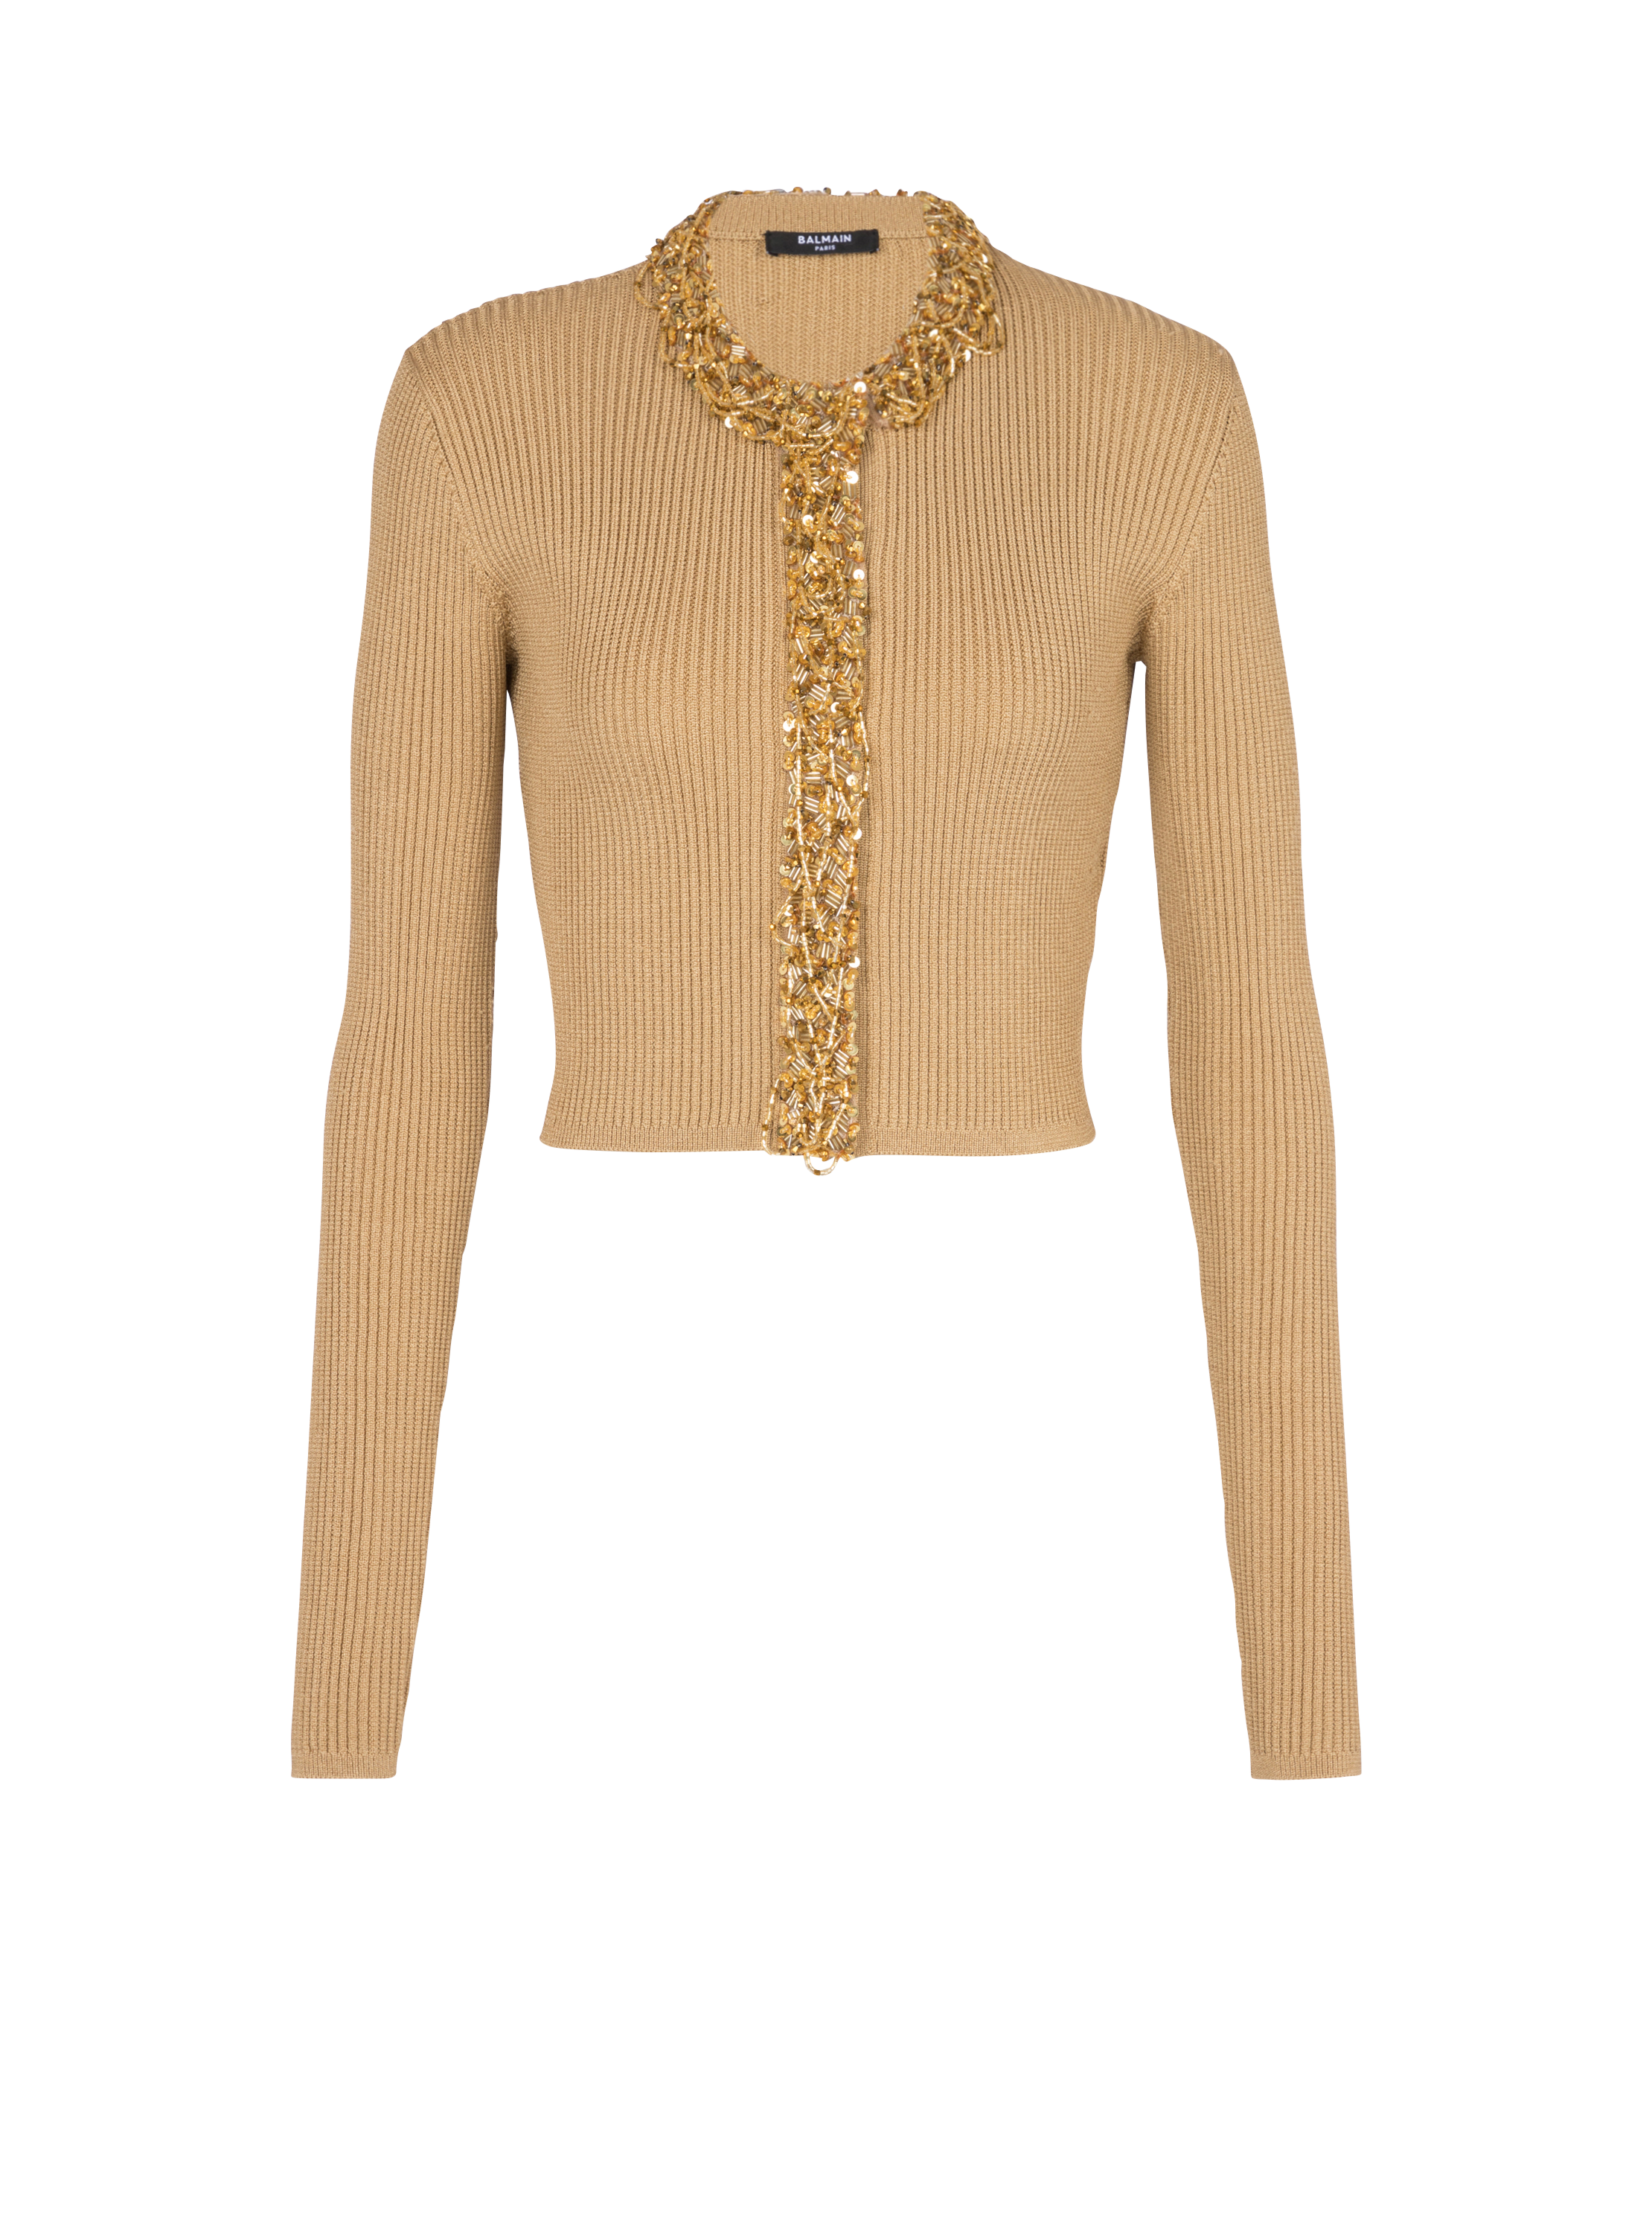 Embroidered knit cardigan, brown, hi-res